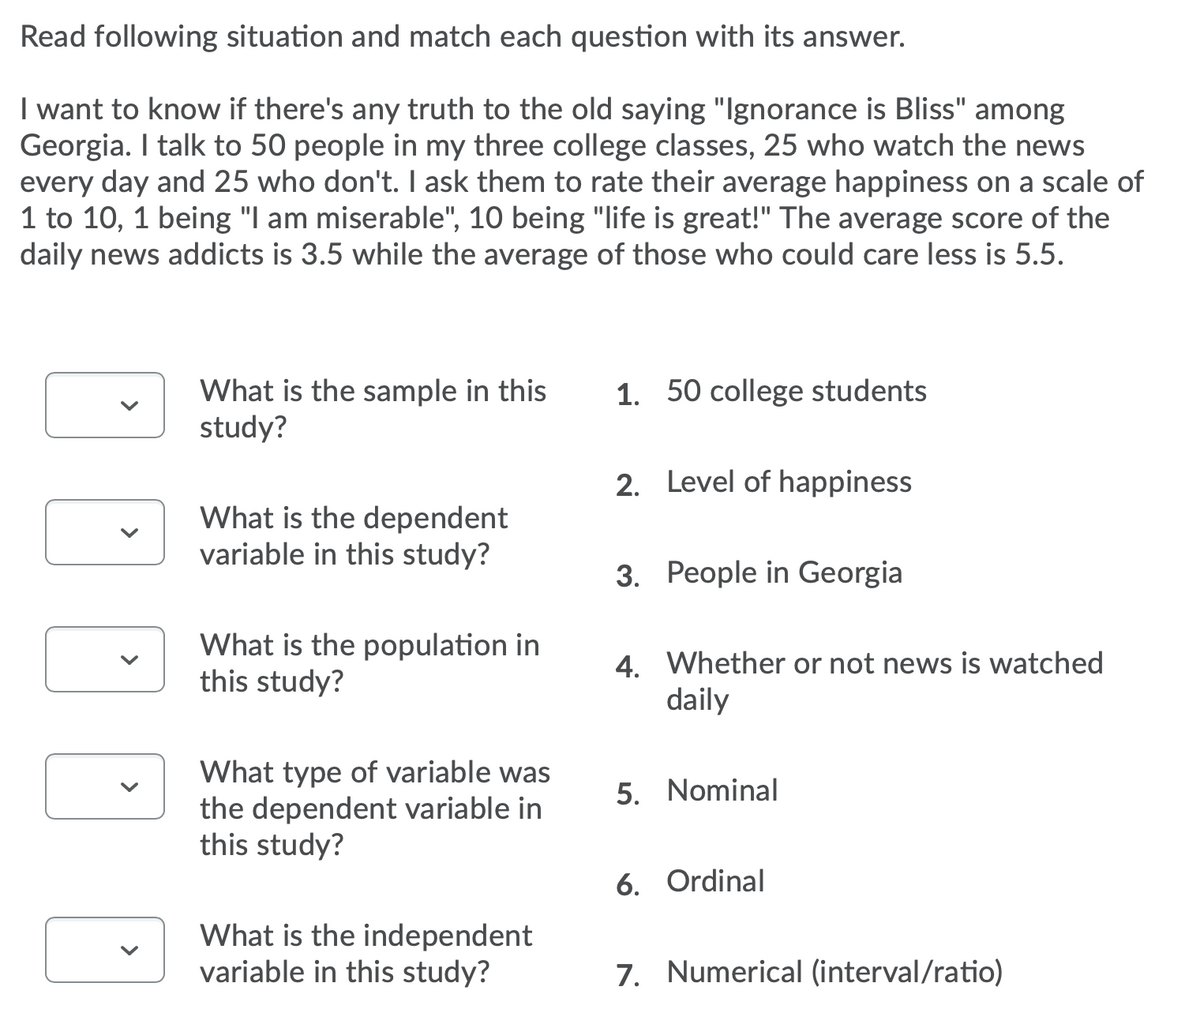 Read following situation and match each question with its answer.
I want to know if there's any truth to the old saying "Ignorance is Bliss" among
Georgia. I talk to 50 people in my three college classes, 25 who watch the news
every day and 25 who don't. I ask them to rate their average happiness on a scale of
1 to 10, 1 being "I am miserable", 10 being "life is great!" The average score of the
daily news addicts is 3.5 while the average of those who could care less is 5.5.
1. 50 college students
What is the sample in this
study?
2. Level of happiness
What is the dependent
variable in this study?
3. People in Georgia
What is the population in
this study?
4. Whether or not news is watched
daily
What type of variable was
the dependent variable in
this study?
5. Nominal
6. Ordinal
What is the independent
variable in this study?
7. Numerical (interval/ratio)
>
